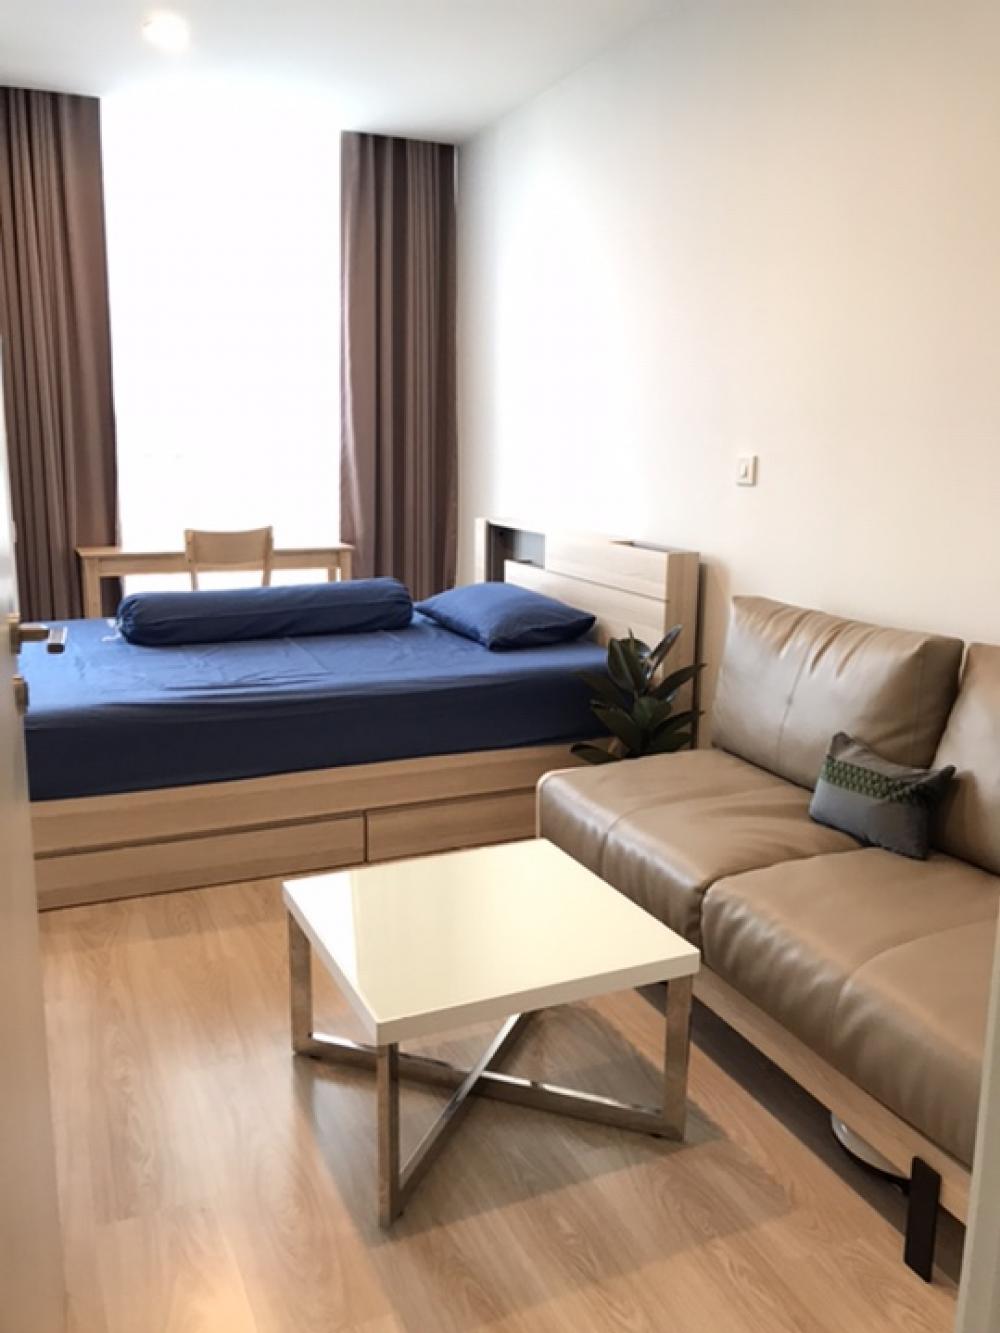 For SaleCondoRatchadapisek, Huaikwang, Suttisan : Urgent sale !! Noble Revolve Ratchada 1 (Studio) fully furnished, garden view, not blocked, not hot, can see the room